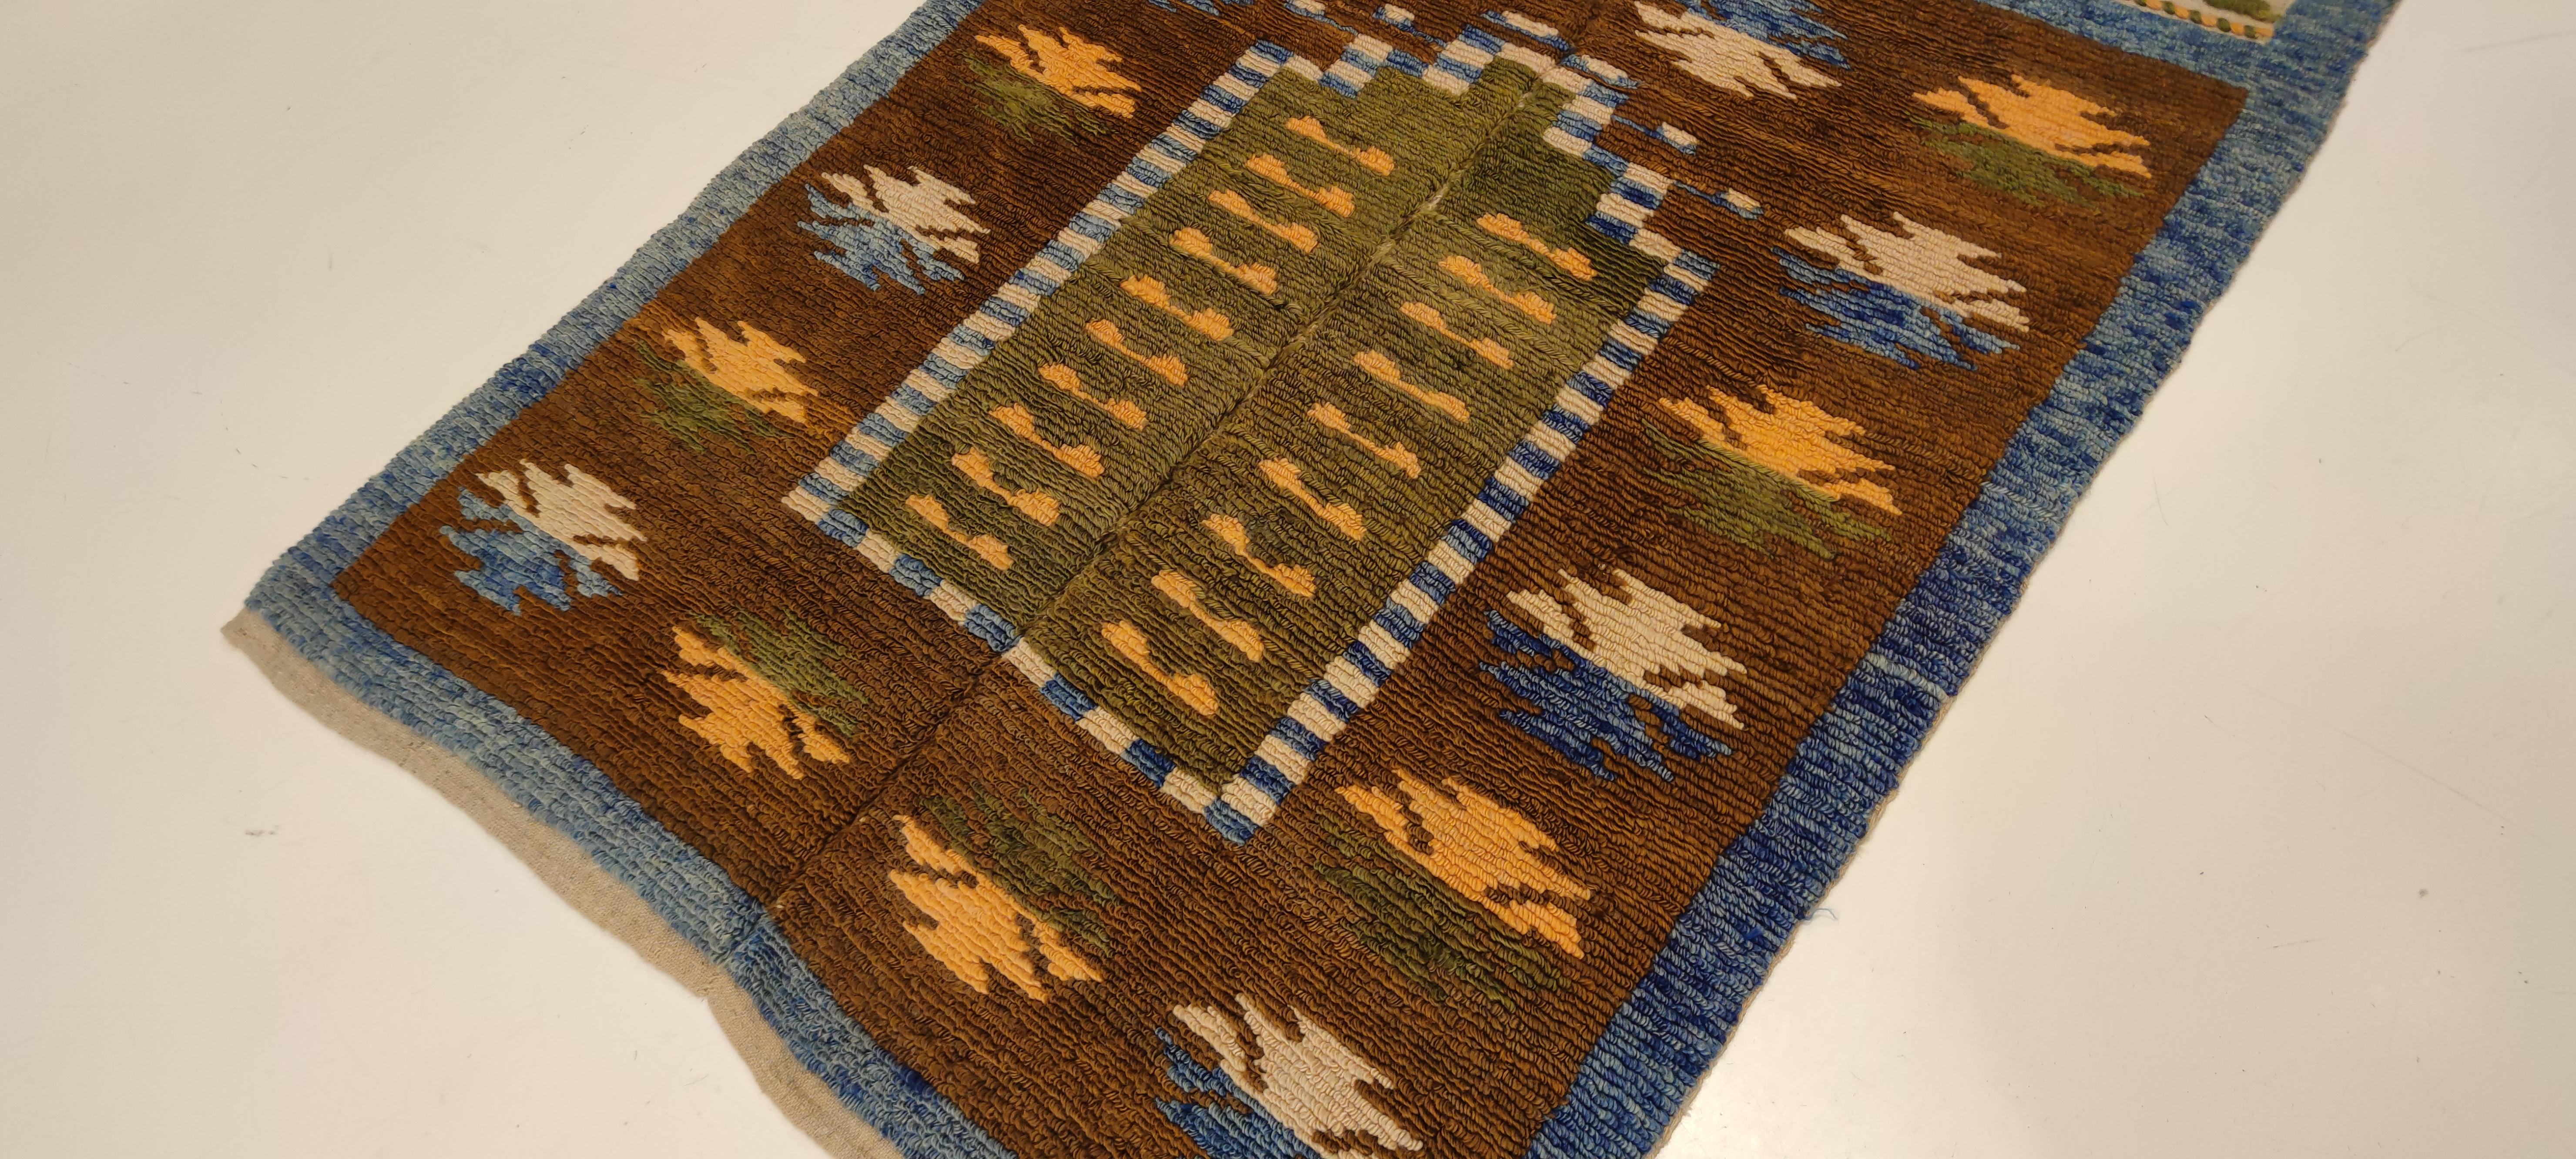 Tulu rugs represent one of the earliest forms of nomadic pile weaving, typically knotted with a medium-high pile as they were meant as bedding rugs for the tent. Woven in the Karapinar area in central Anatolia, these are distinguished by the use of